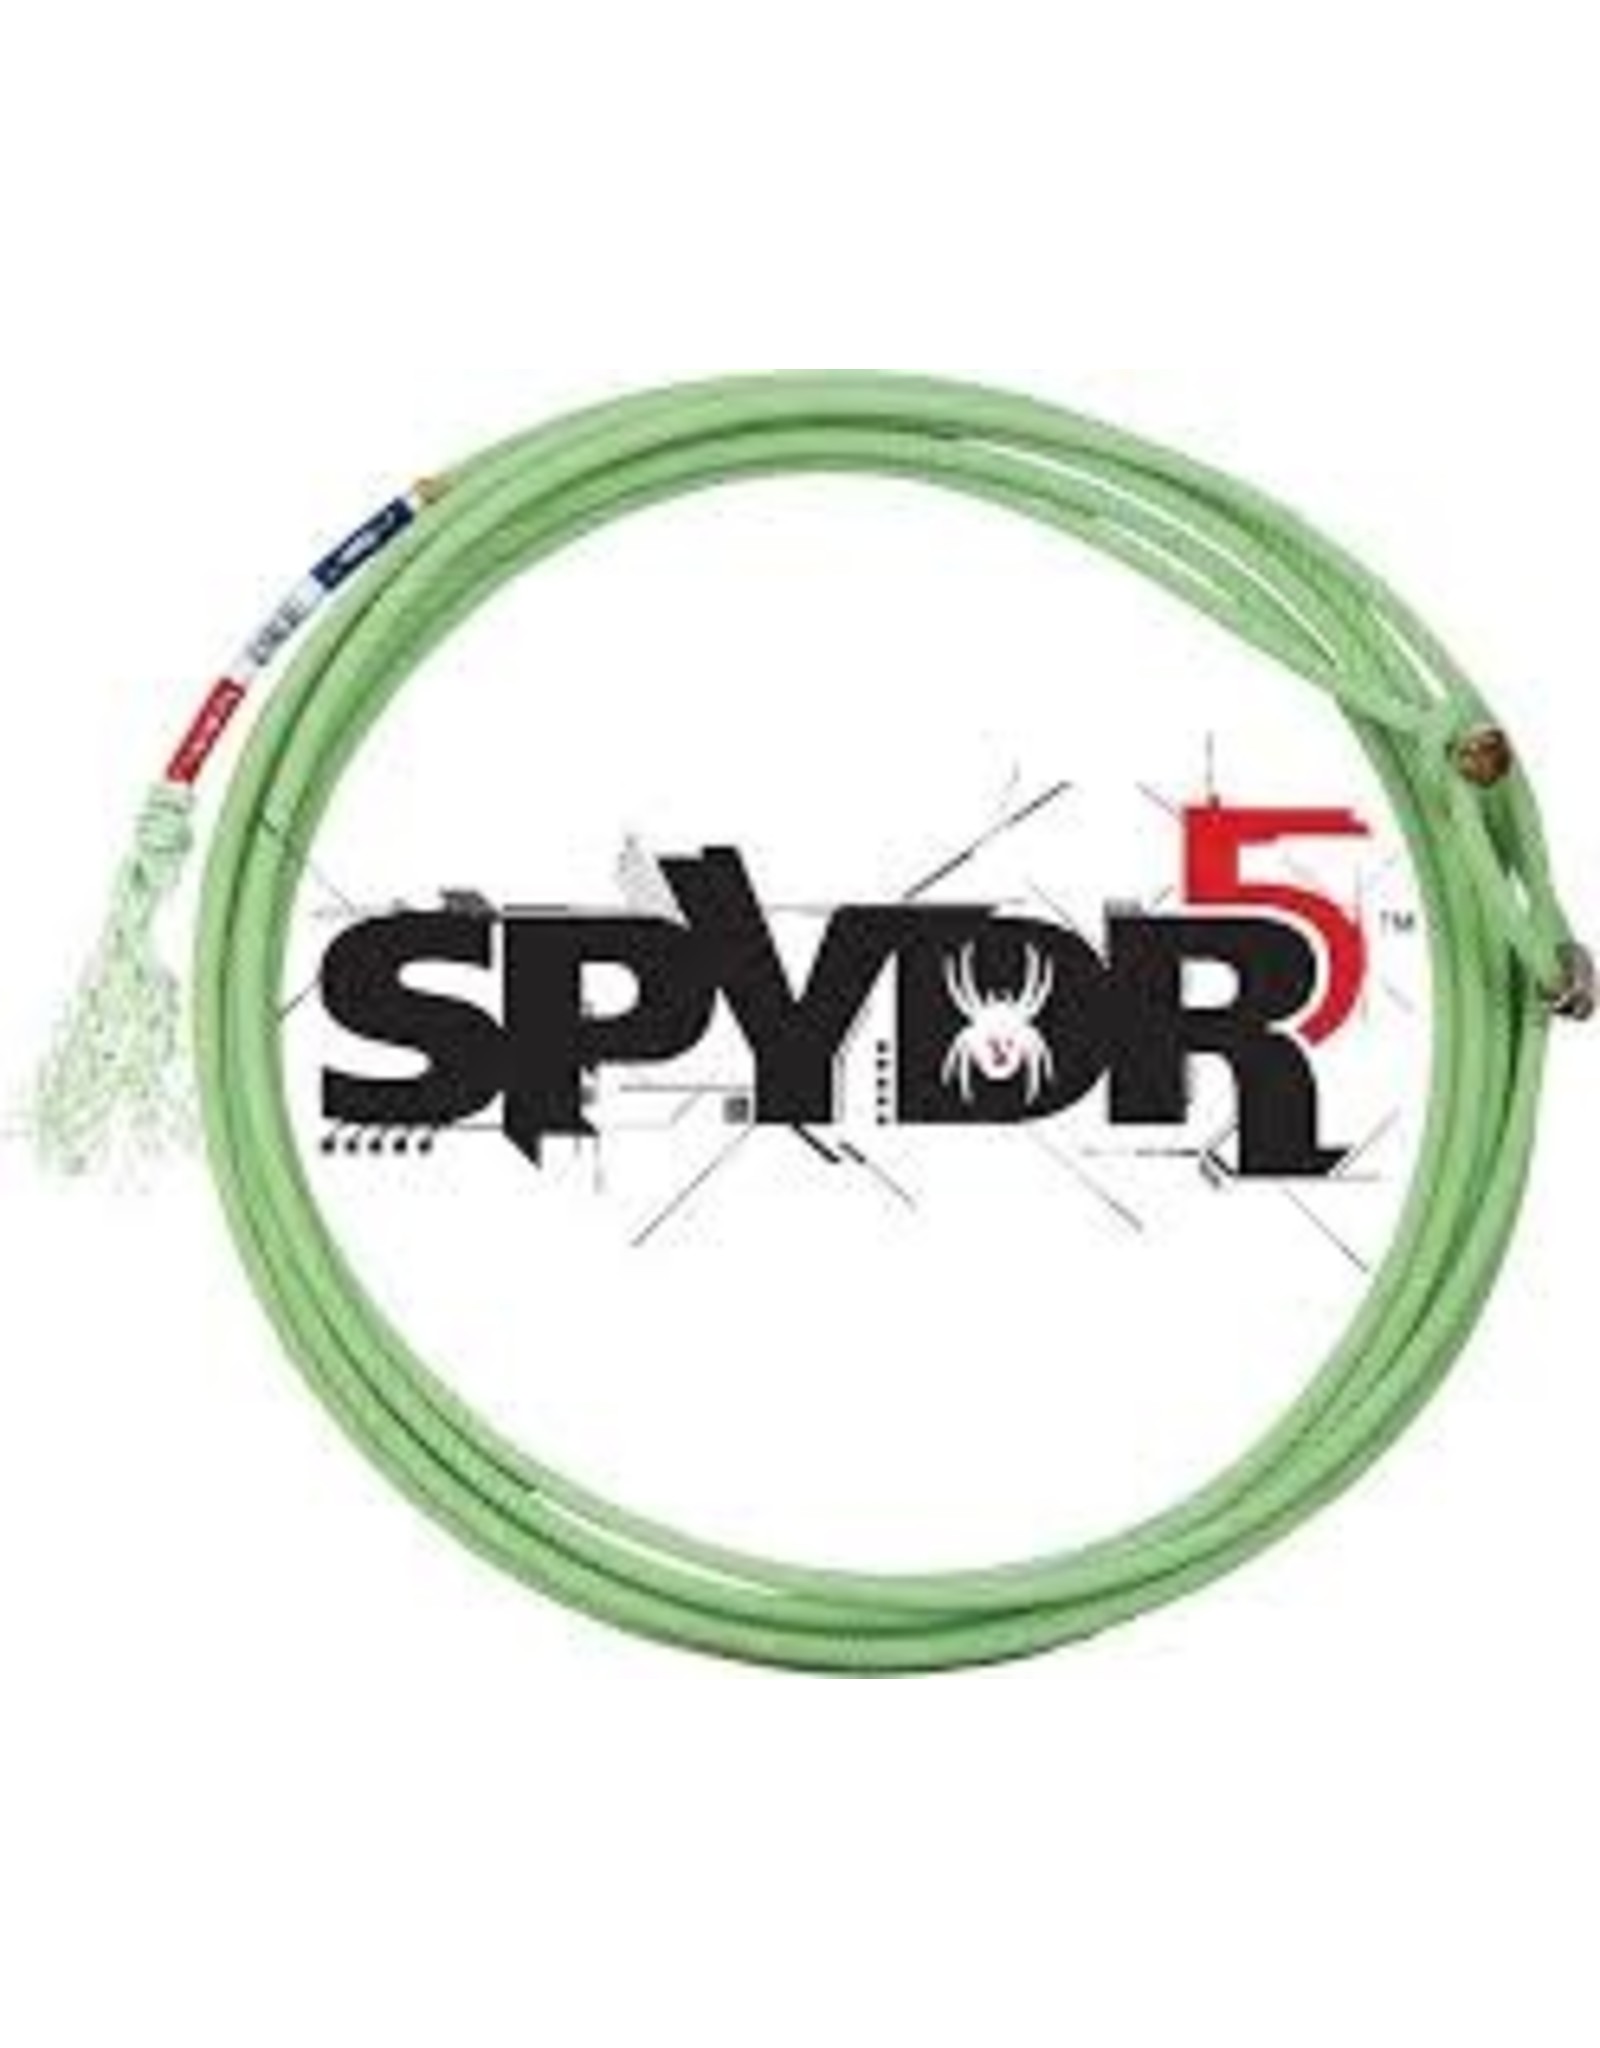 Rope - CLASSIC - Spydr5 30 - S Head